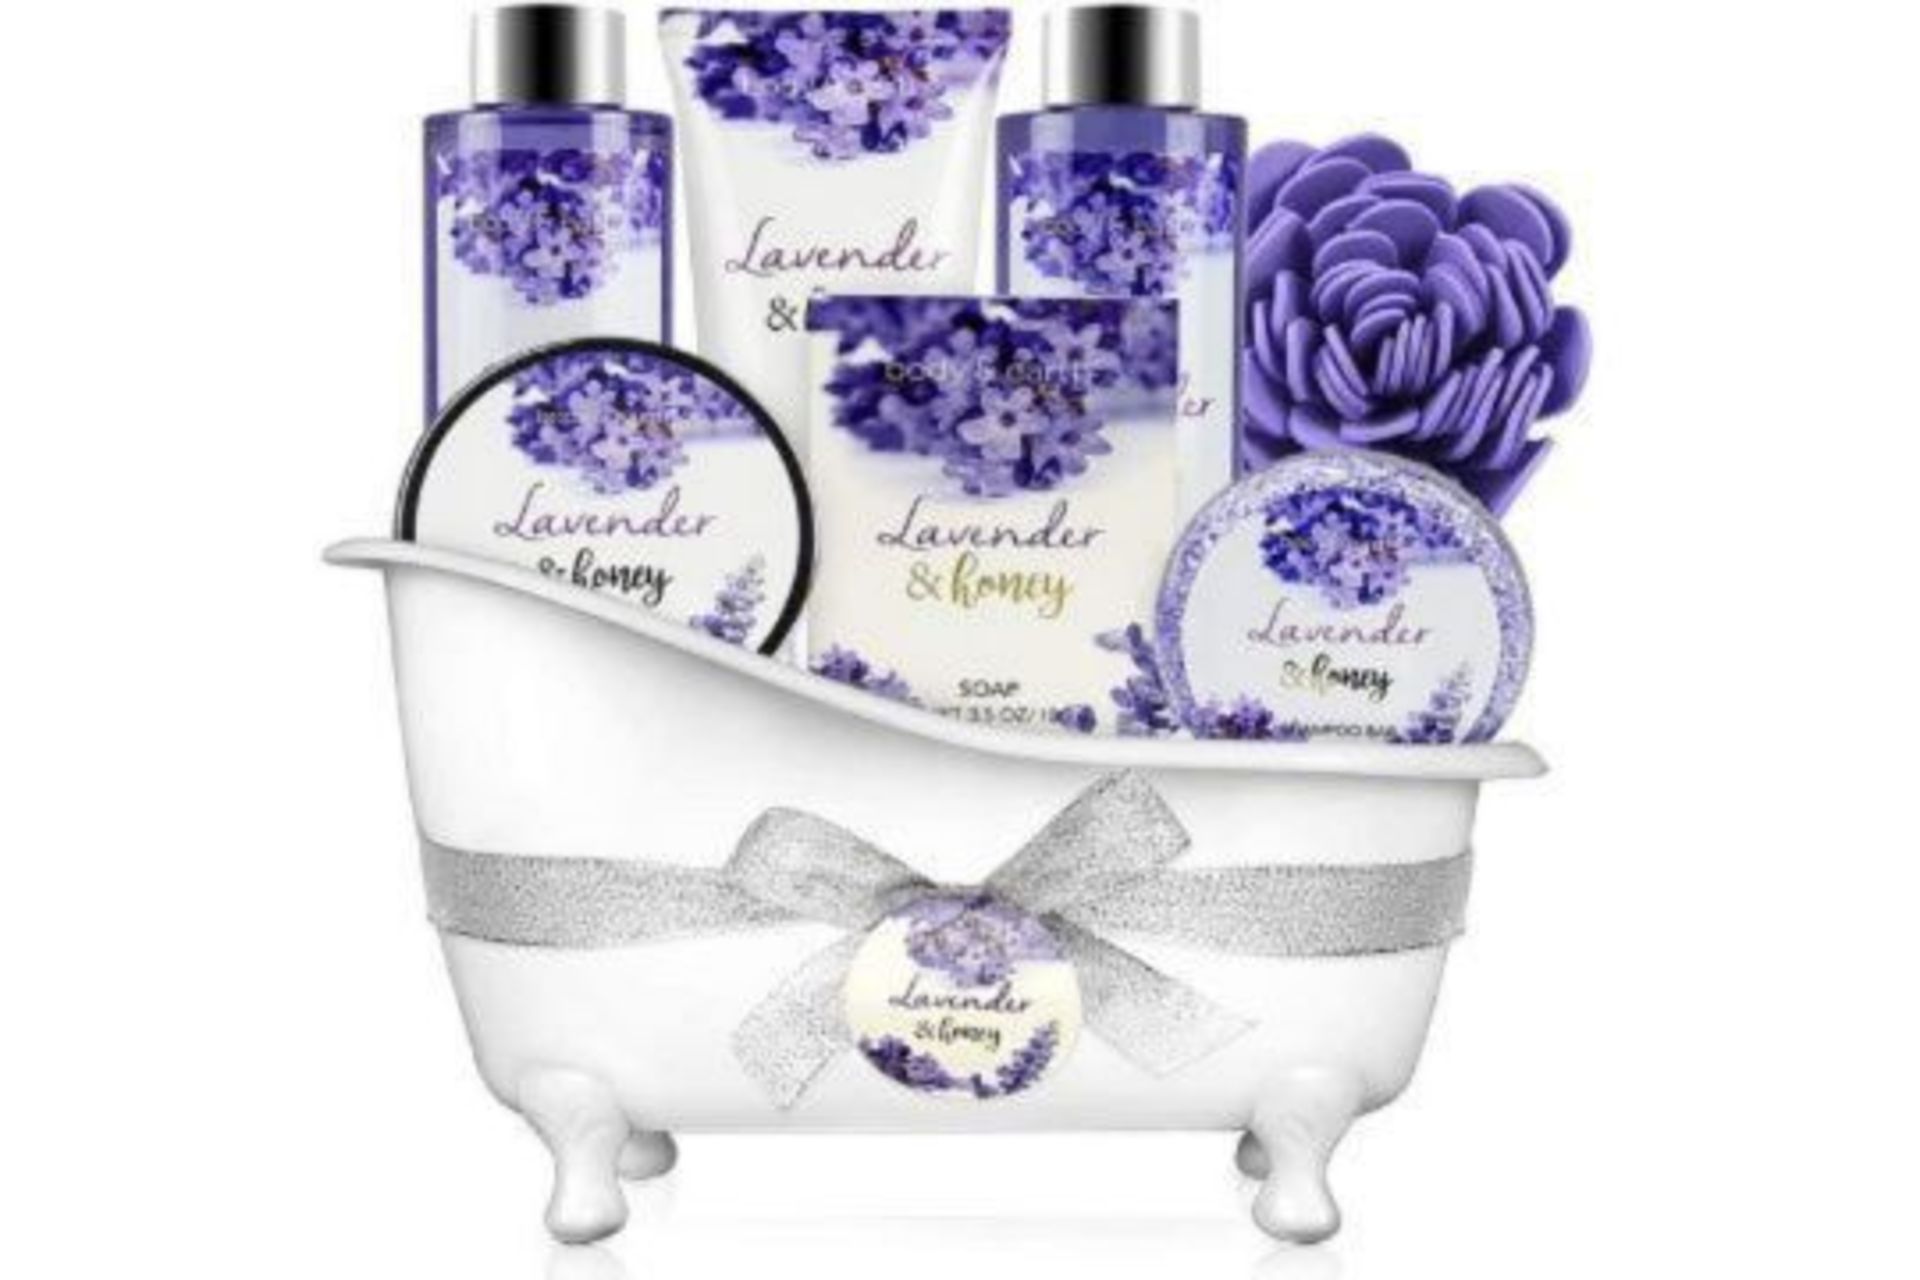 3 X NEW PACKAGED BODY EARTH Lavender Honey Spa Bathtub Set. (AMABE-3-1) Contents: This bath set